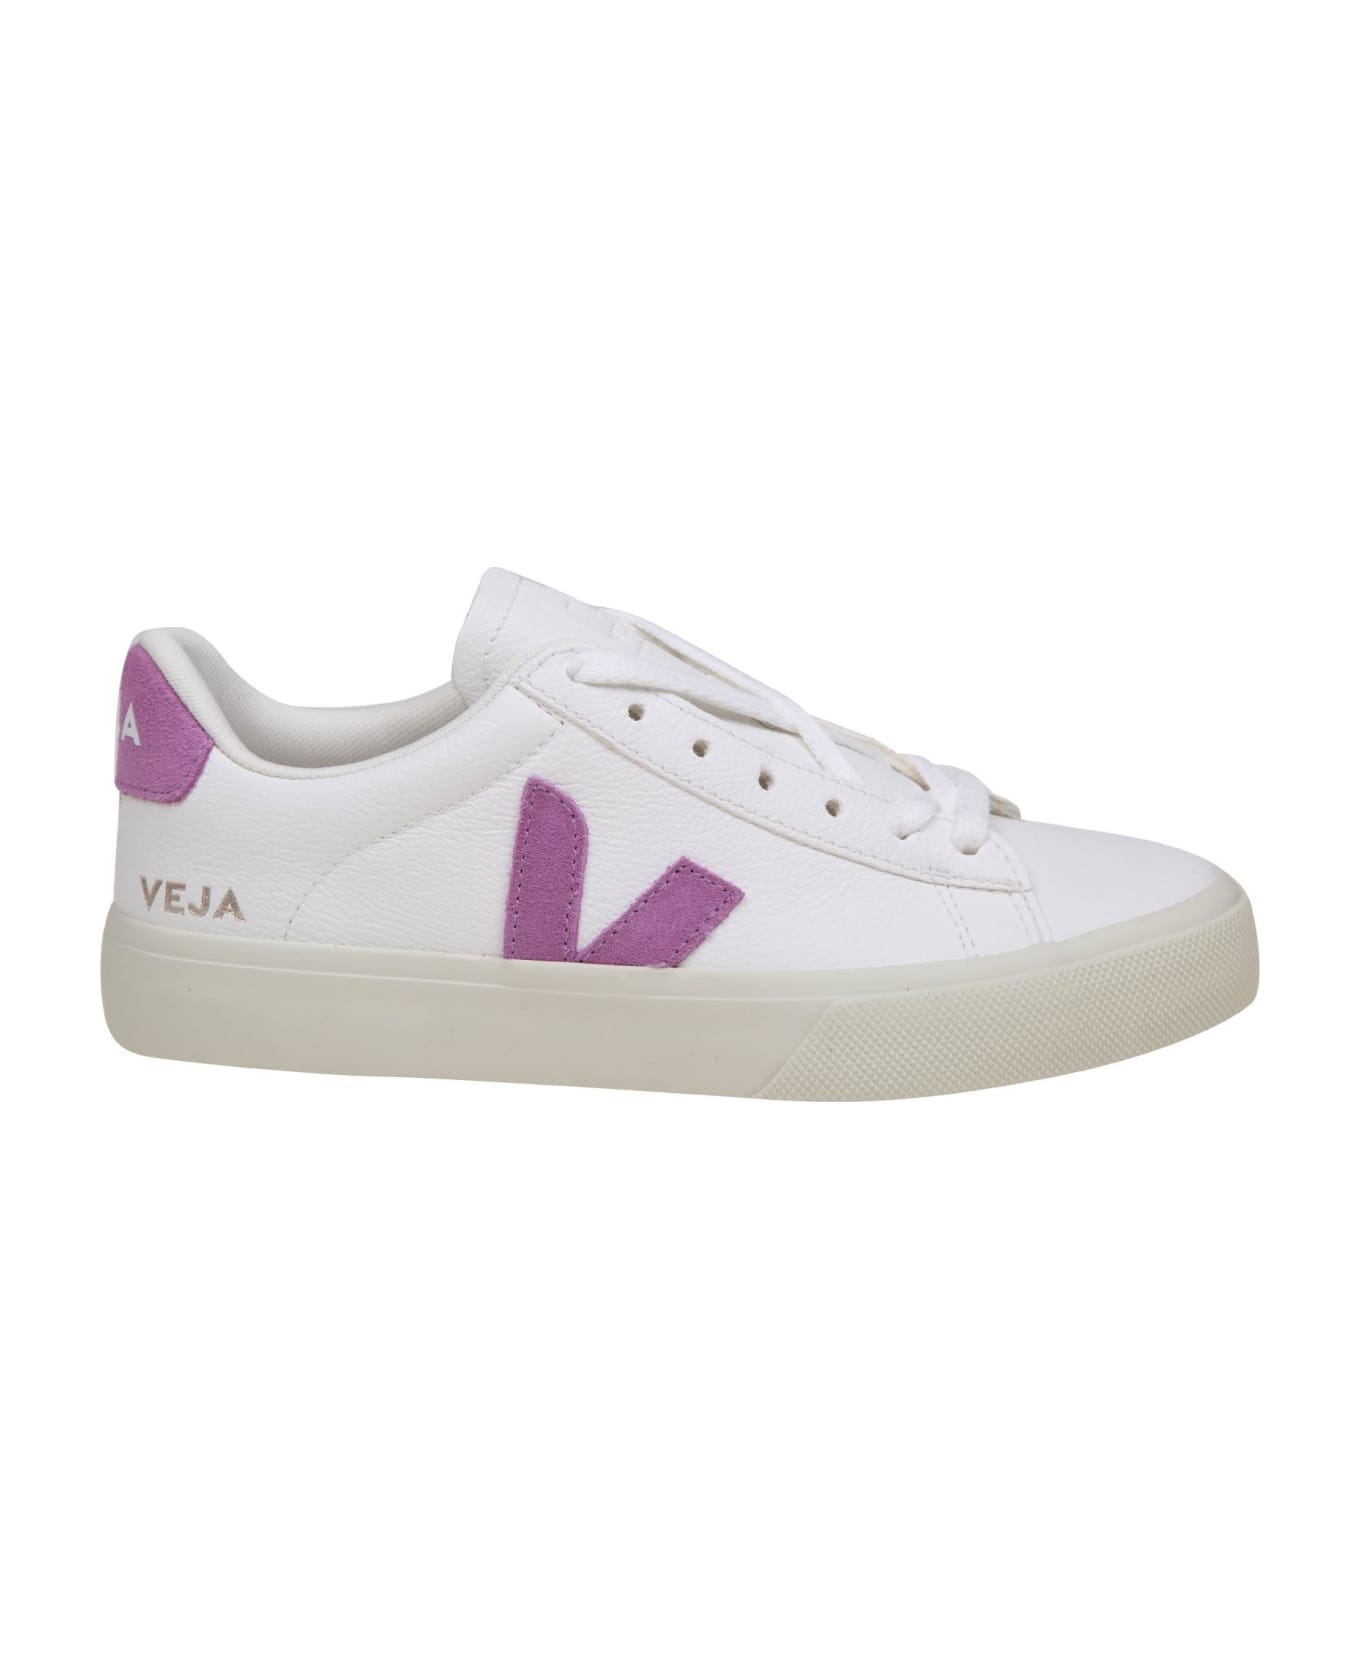 Veja Campo Chromefree In White/mulberry Leather スニーカー